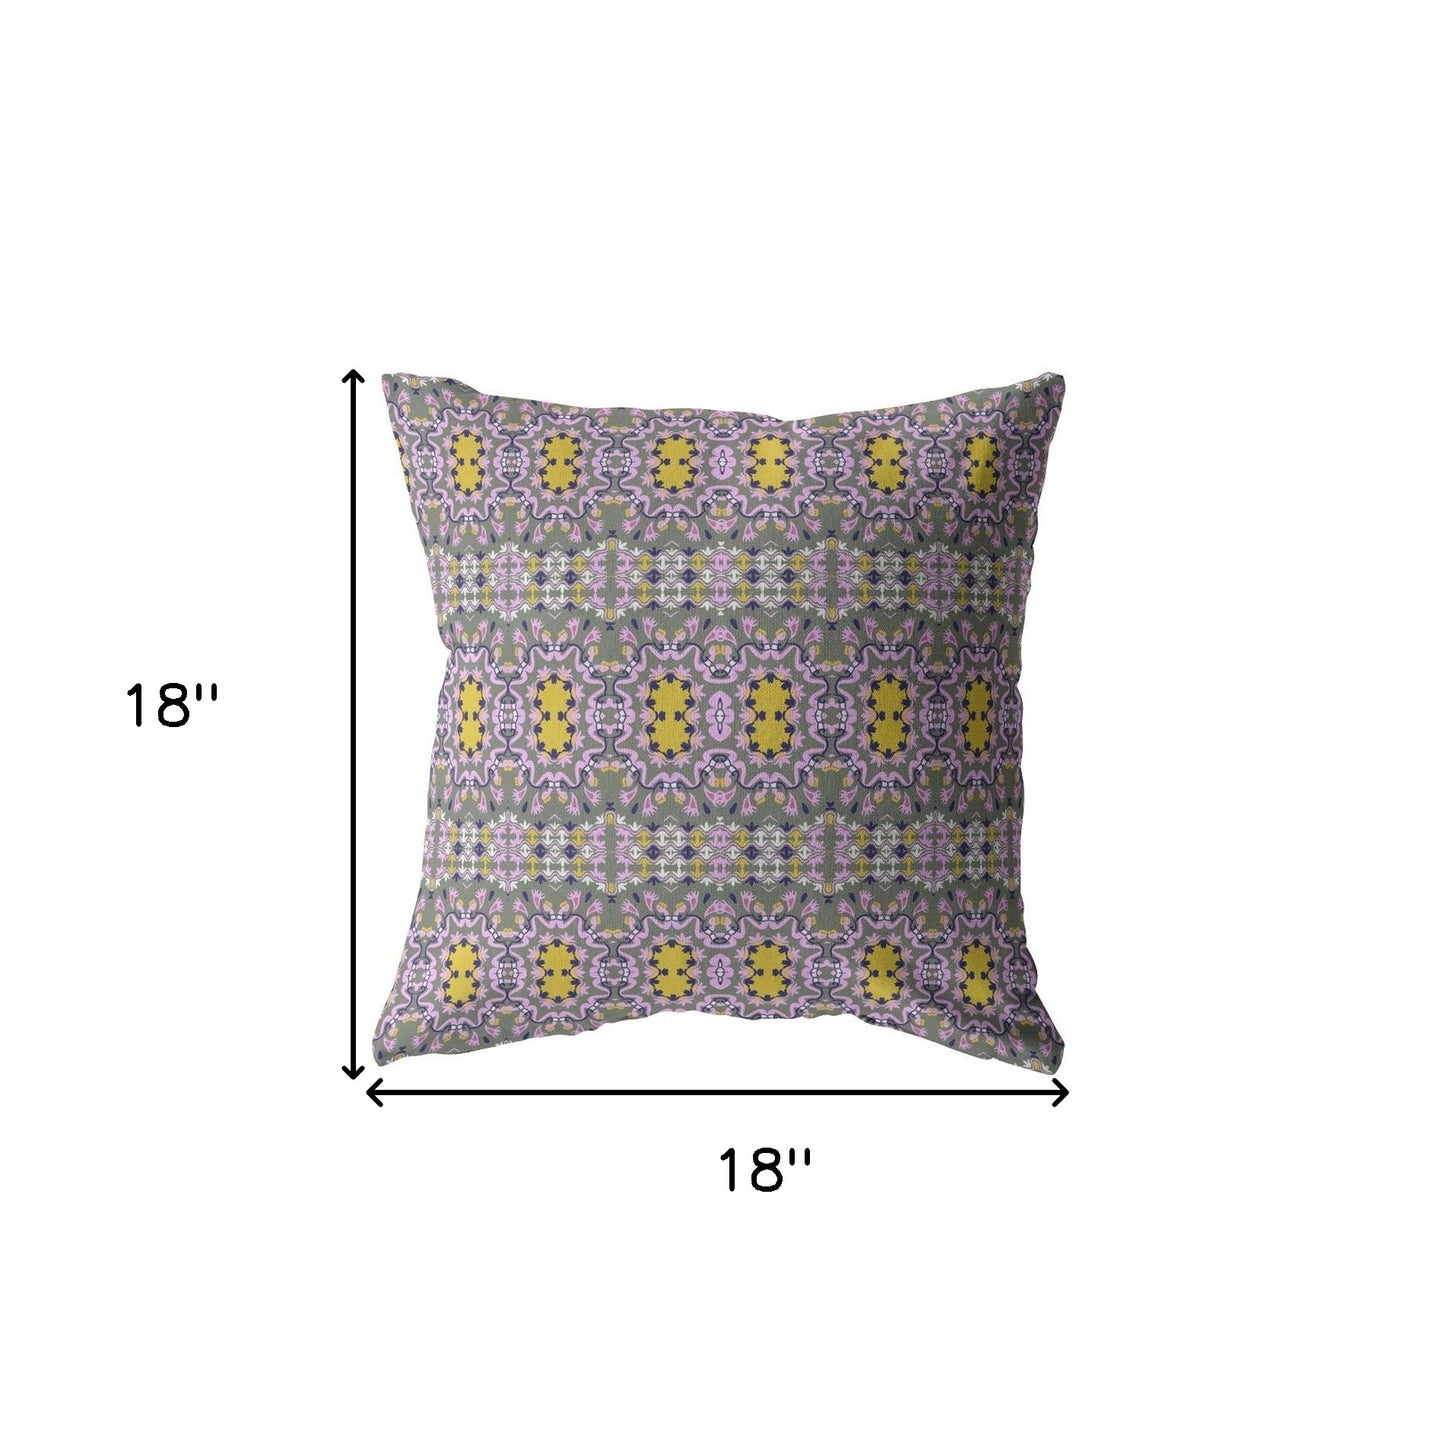 18” Purple Yellow Geofloral Suede Throw Pillow